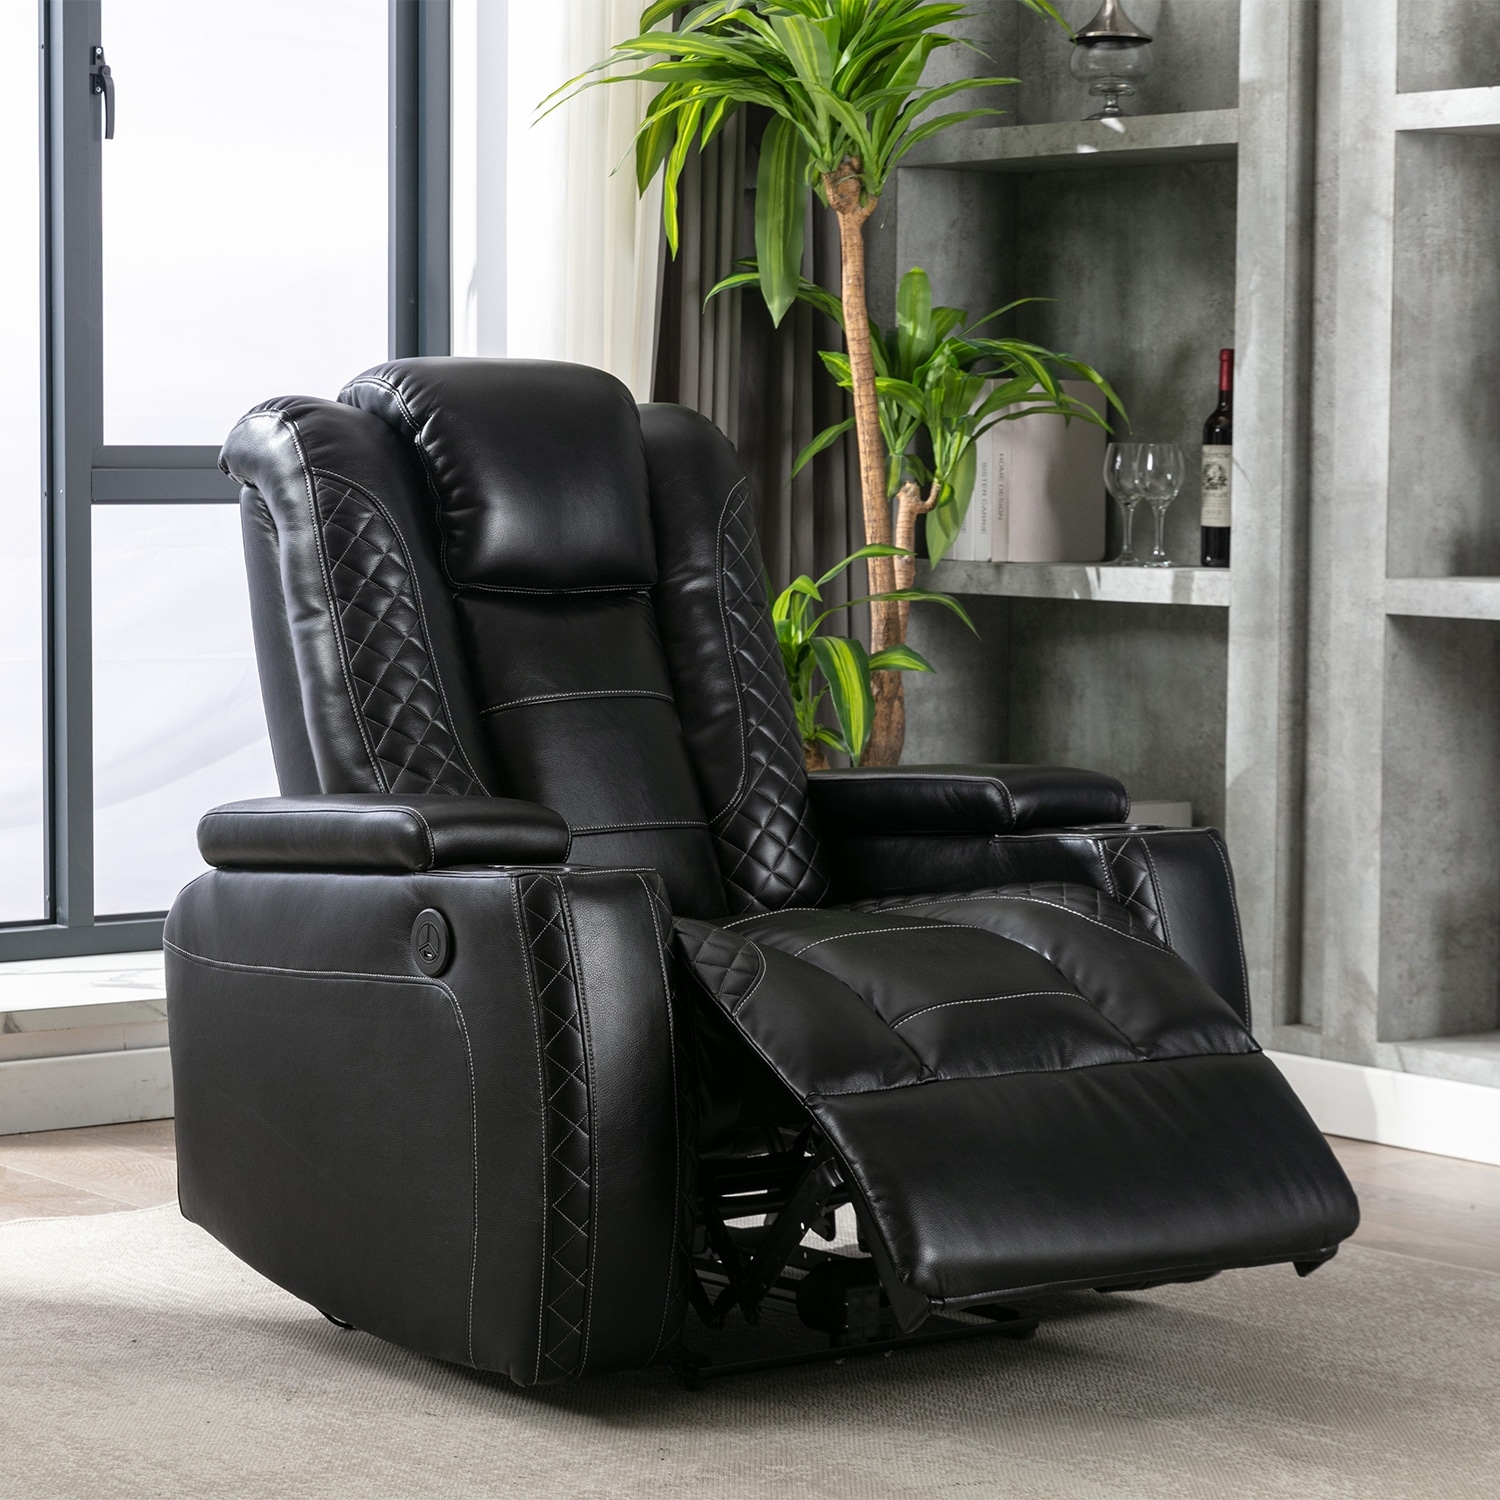 Homall Massage Recliner Chair, Recliner Sofa PU Leather for Adults,  Recliners Home Theater Seating with Lumbar Support, Reclining Sofa Chair  for